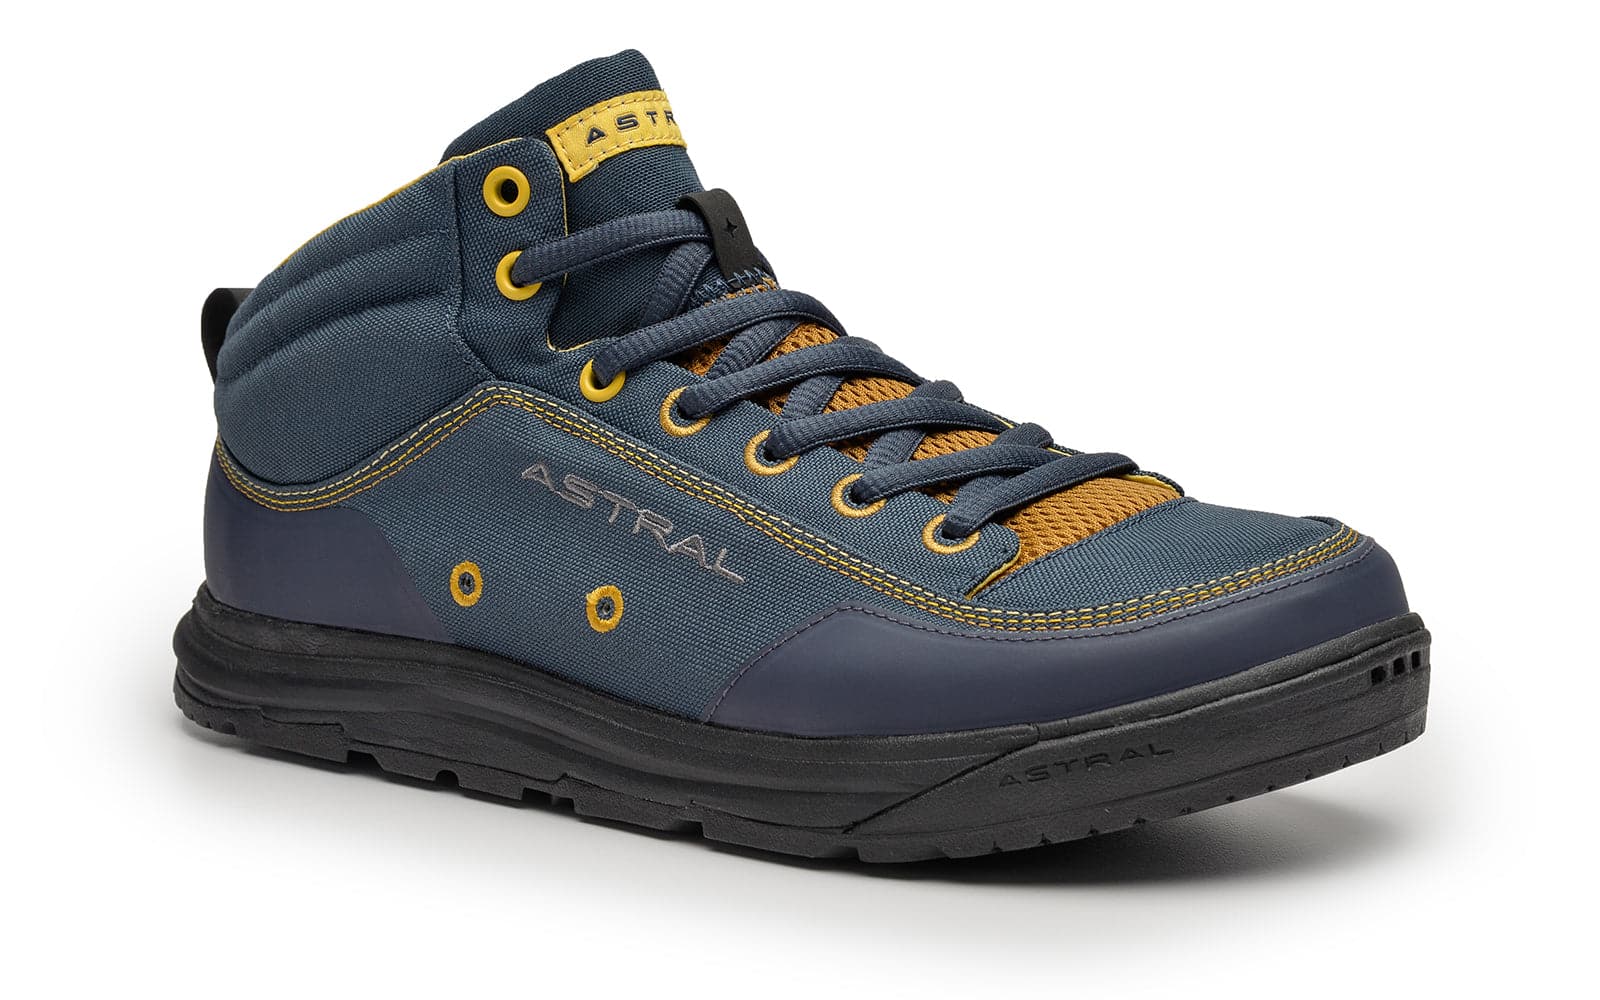 Featuring the Rassler 2.0 men's footwear, women's footwear manufactured by Astral shown here from a second angle.